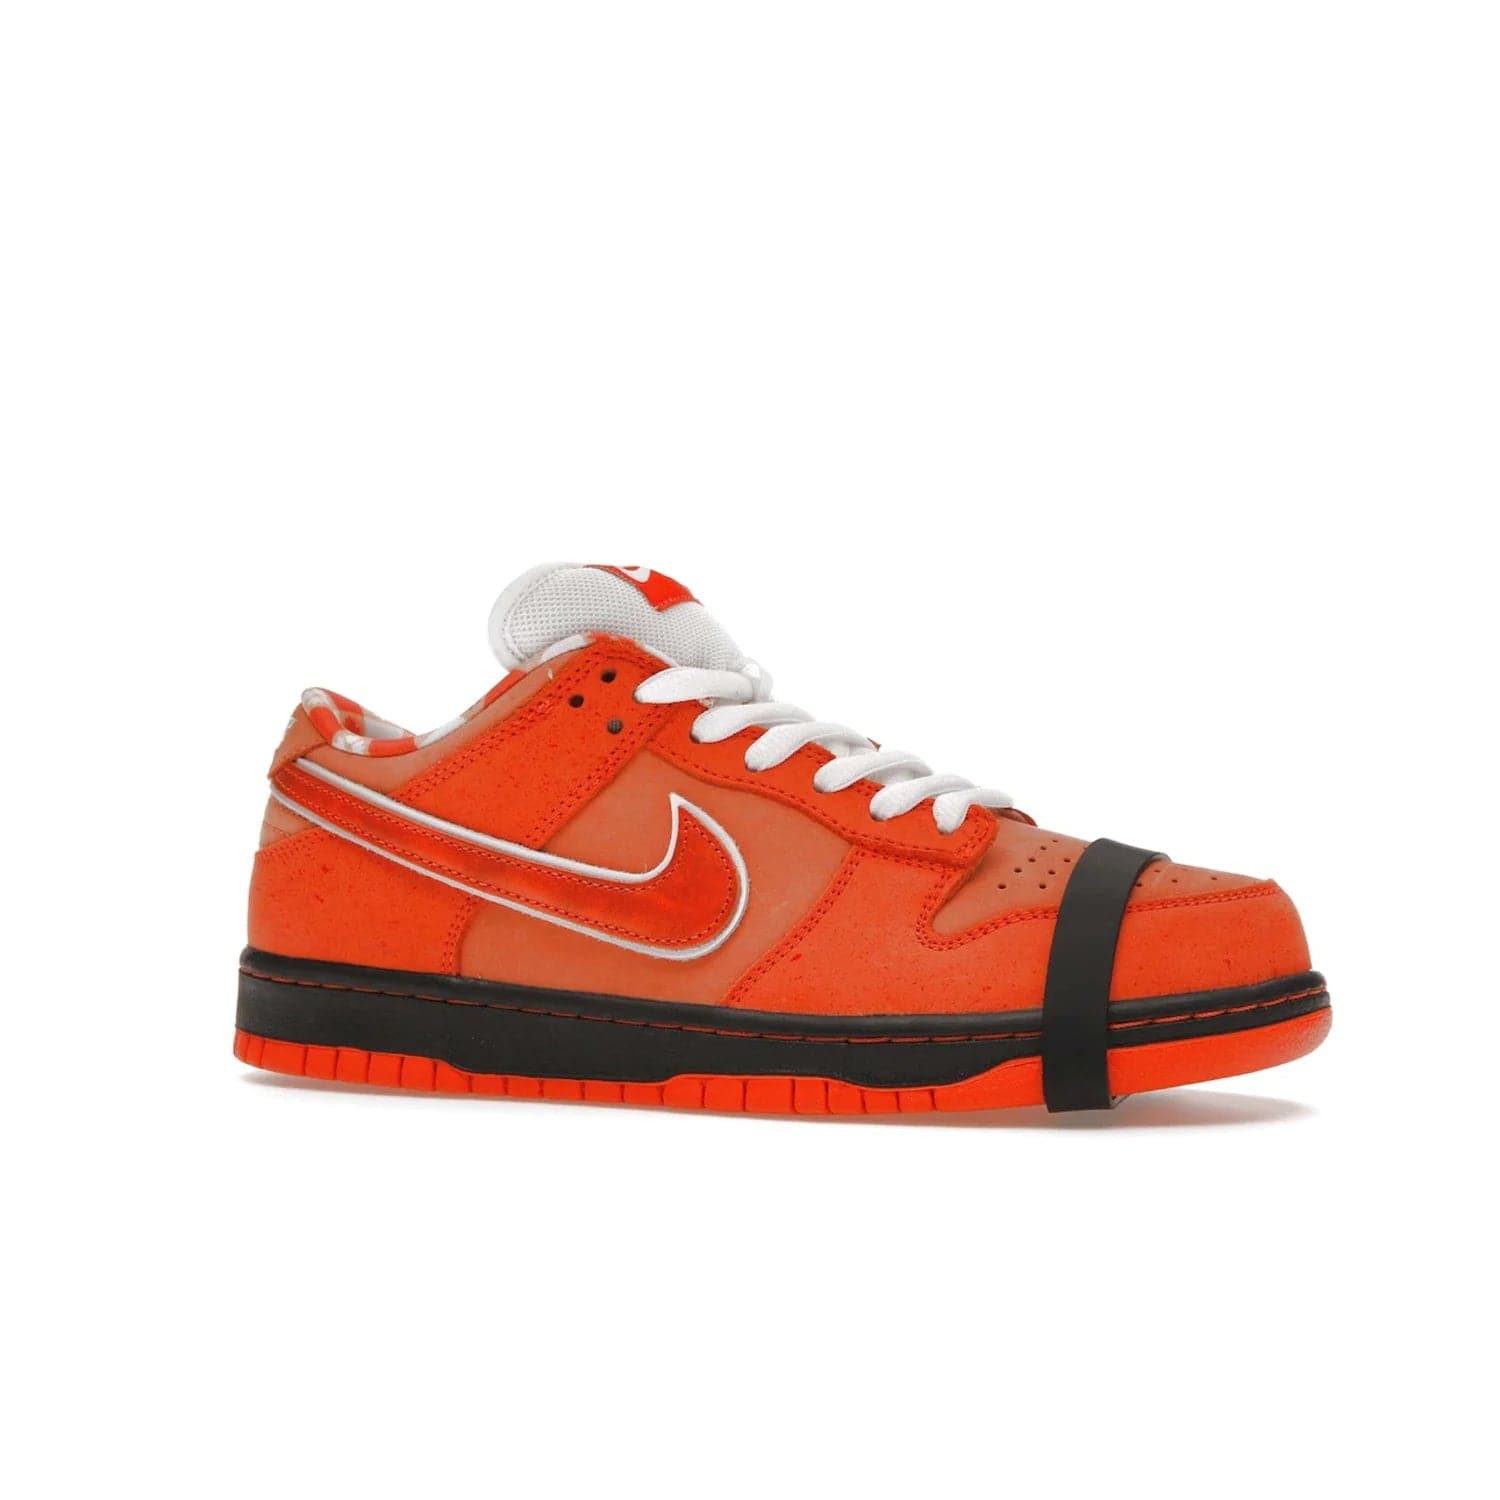 Nike SB Dunk Low Concepts Orange Lobster - Image 3 - Only at www.BallersClubKickz.com - Limited Nike SB Dunk Low Concepts Orange Lobster features premium nubuck upper with vibrant oranges for eye-catching colorblocked design. Signature Nike SB tag and bib-inspired interior for added texture. Outsole and cupsole provide extra reinforcement. Get it 12/20/2022.